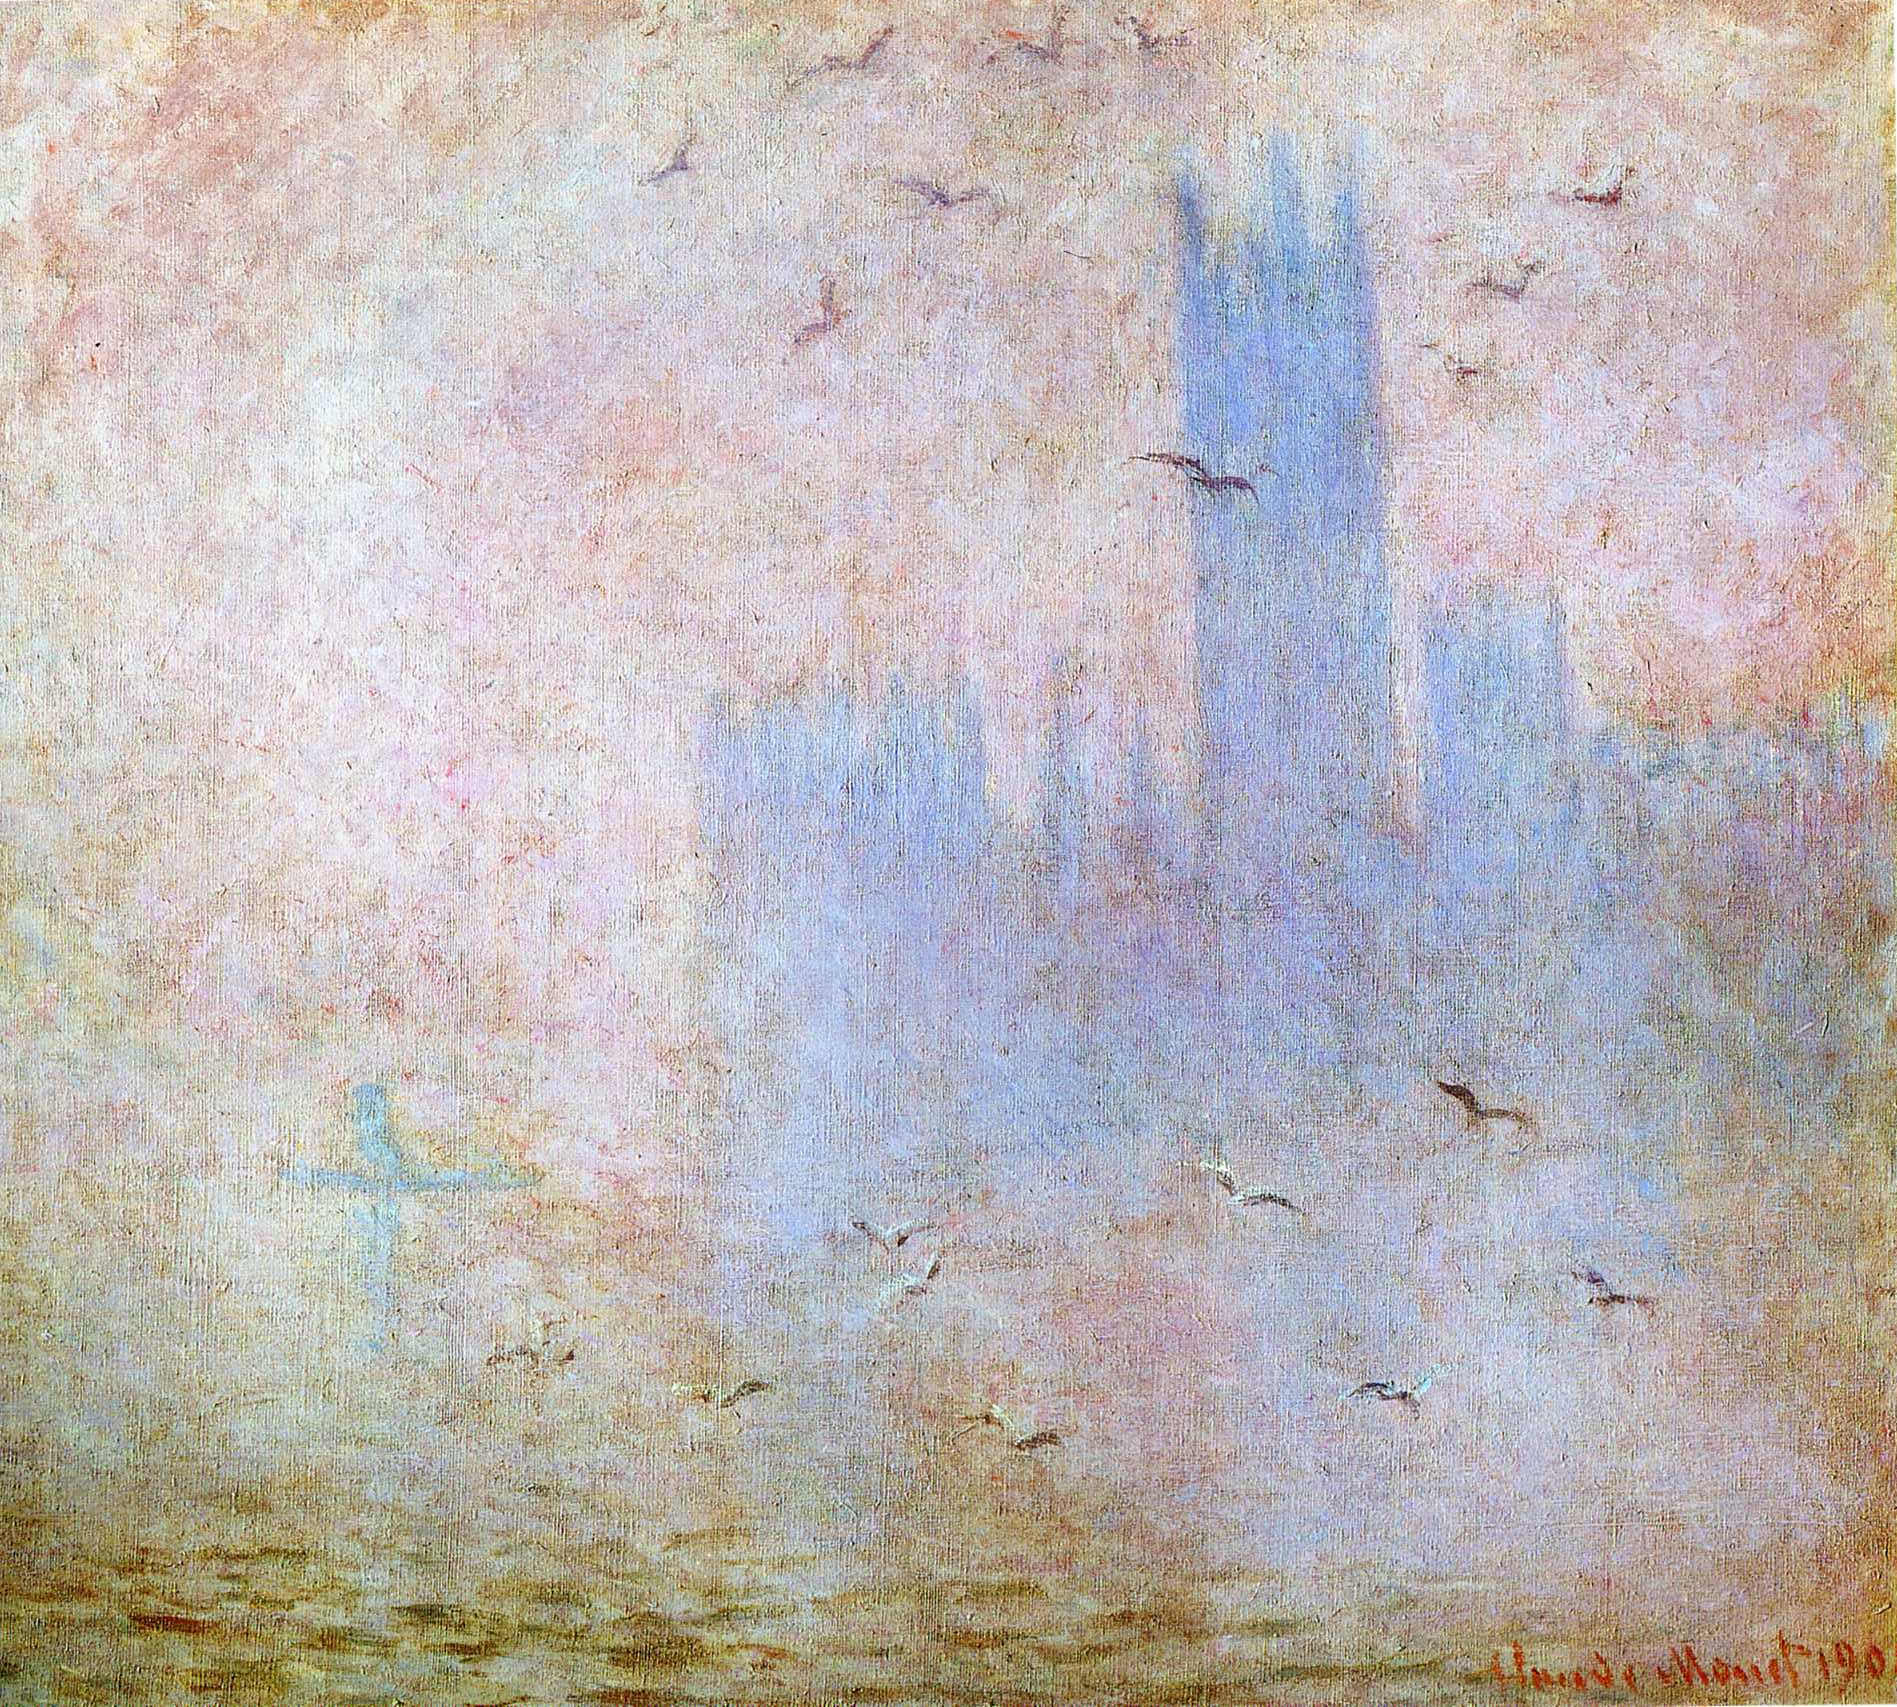 Seagulls over the Houses of Parliament 1904